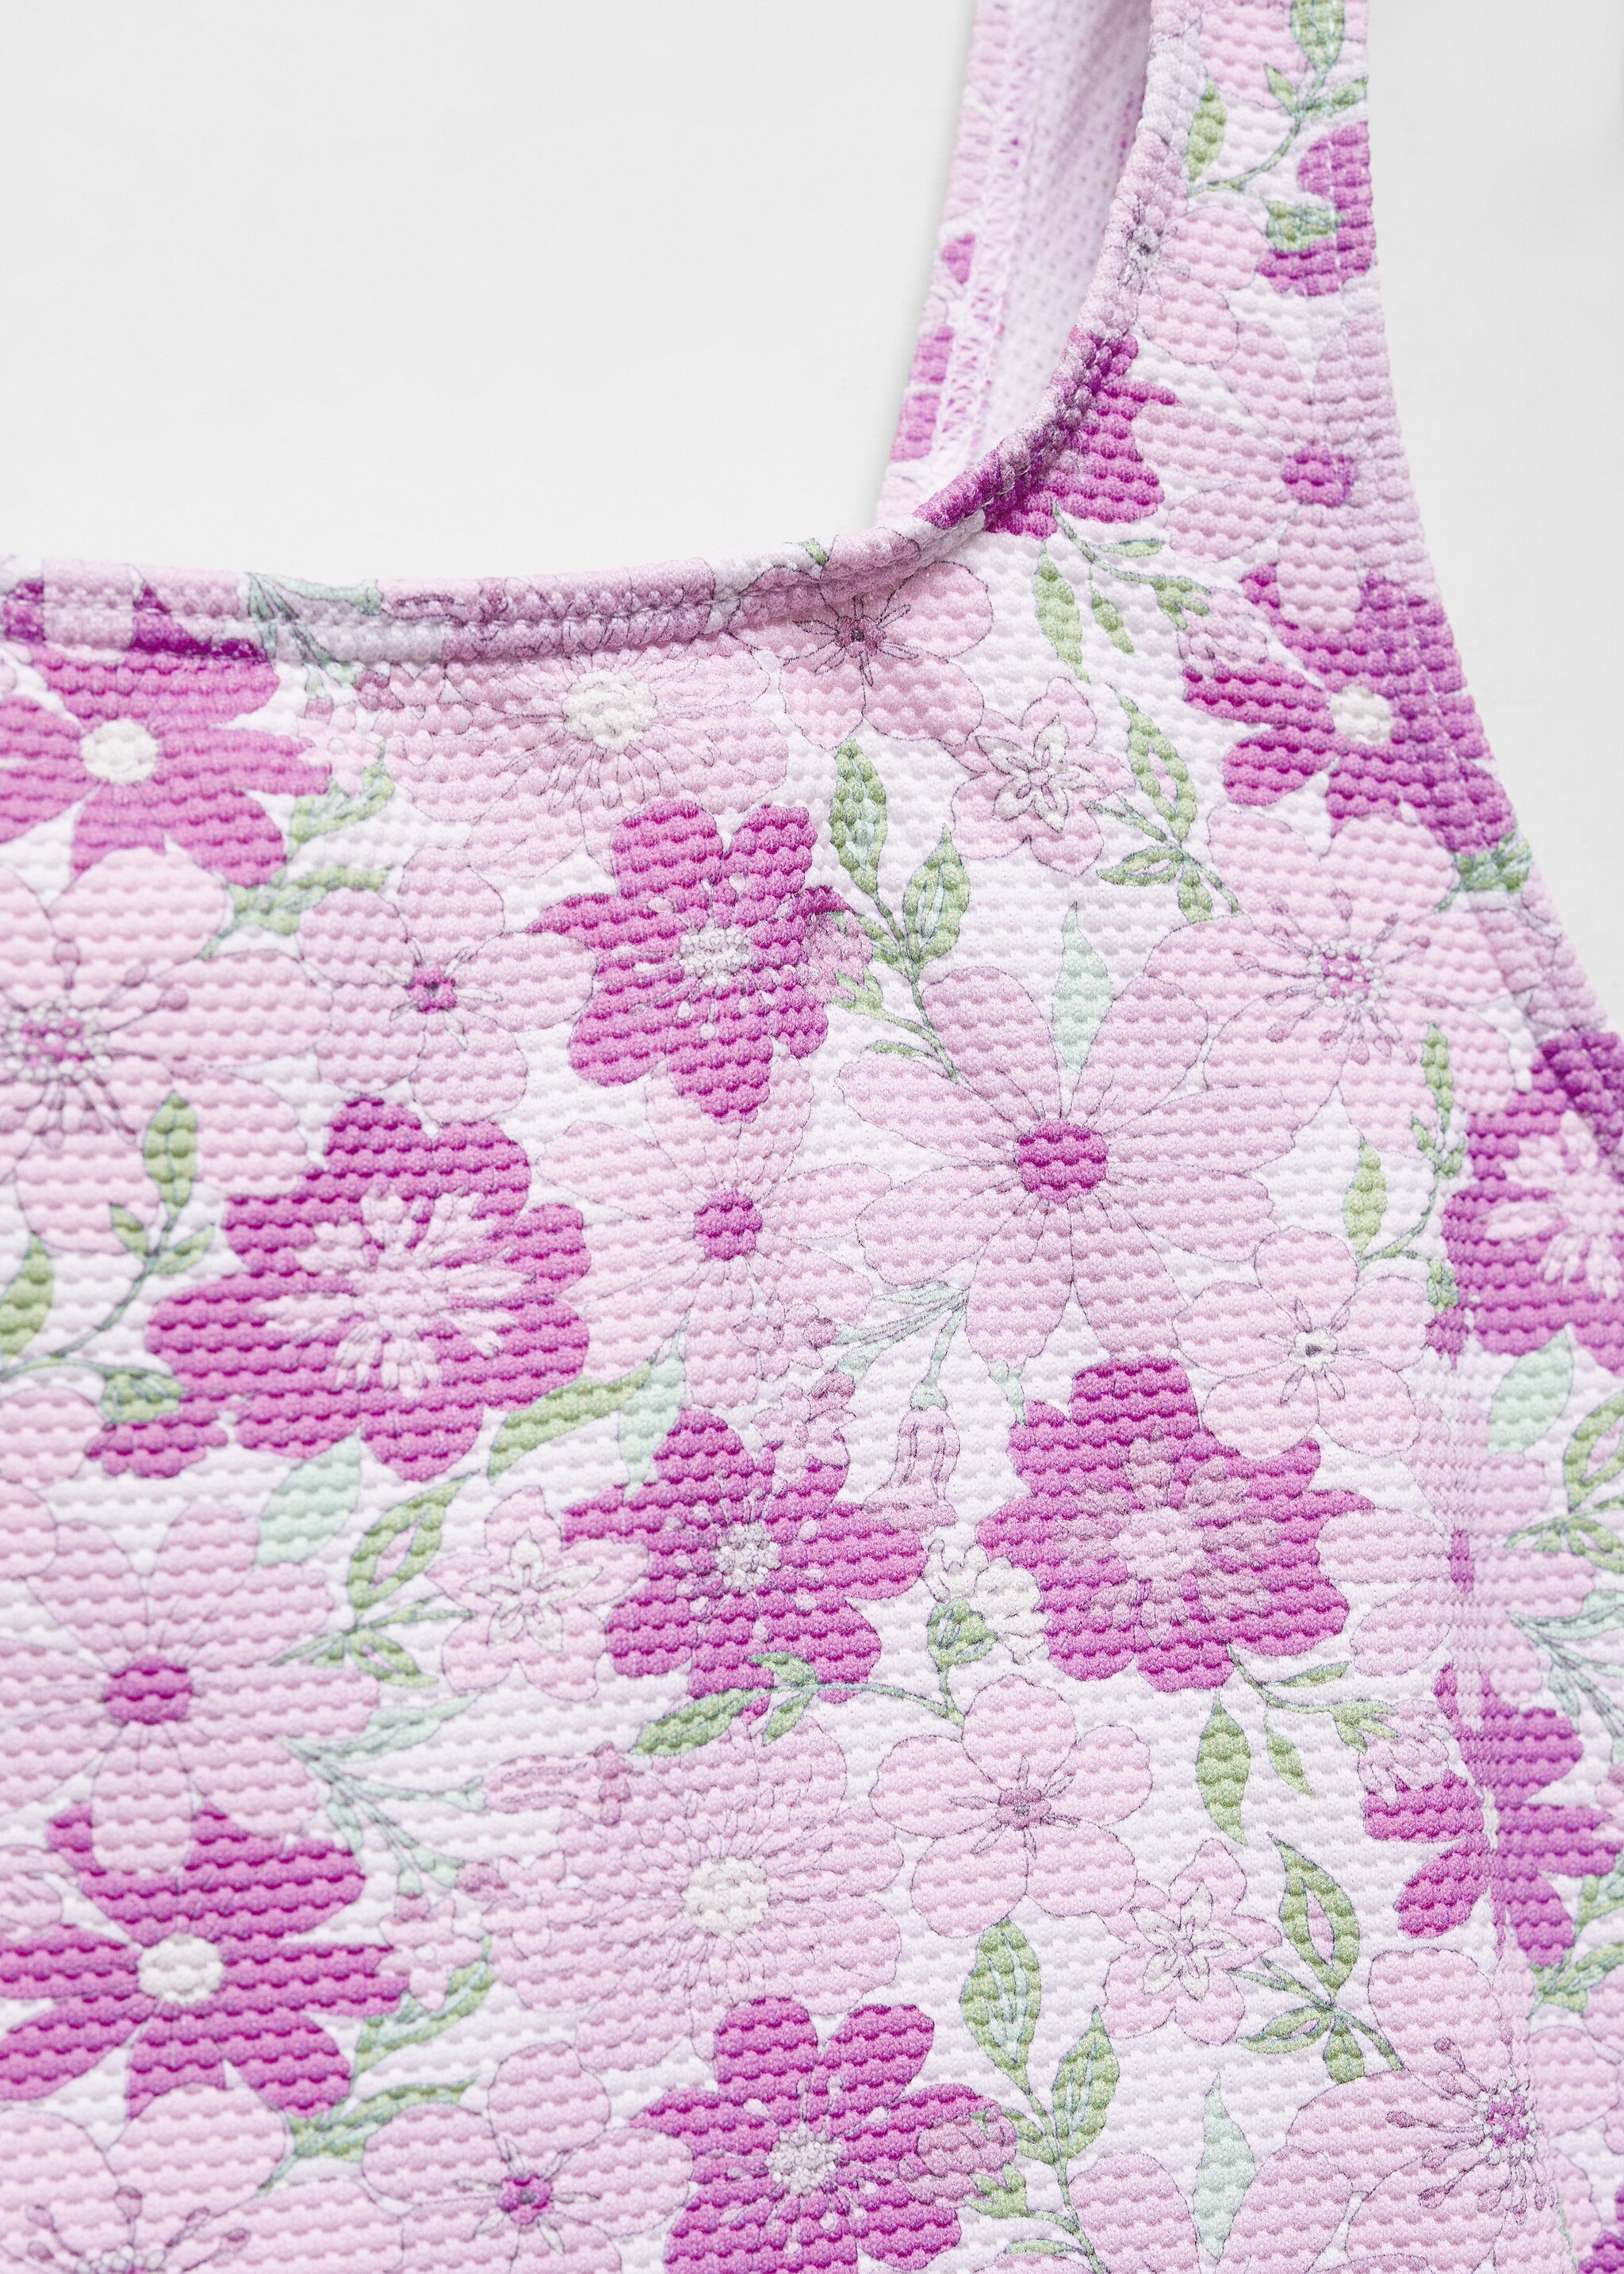 Floral print swimsuit - Details of the article 8